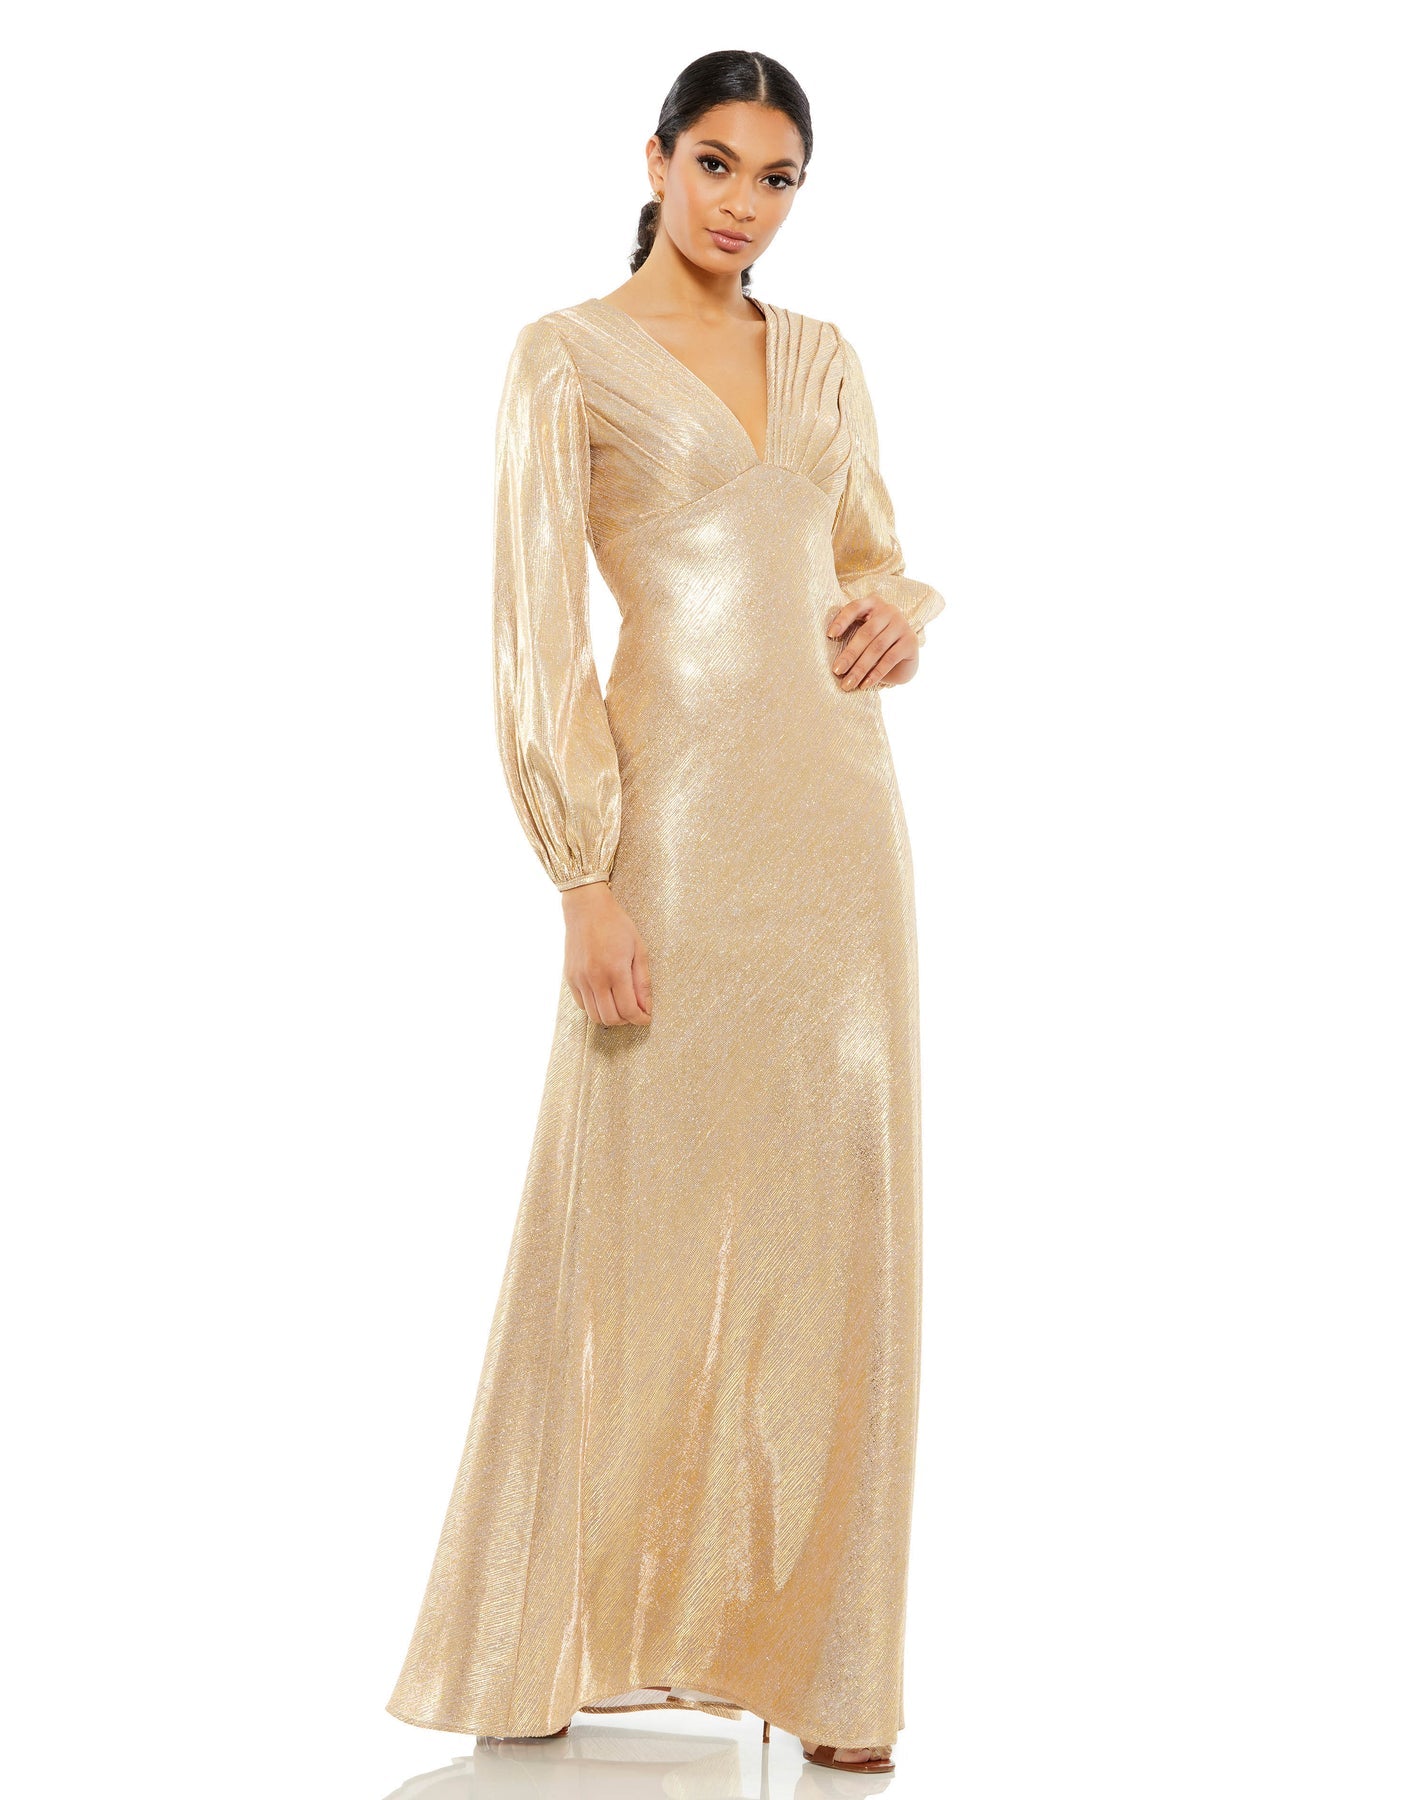 This metallic empire-waist gown features a pleated bodice, v-neckline, long blouson sleeves, and a floor-length skirt with a sweeping hem. Ieena for Mac Duggal 100% Polyester Fully line through the body Long Sleeves Concealed Back Zipper Approx. 62.5" fro